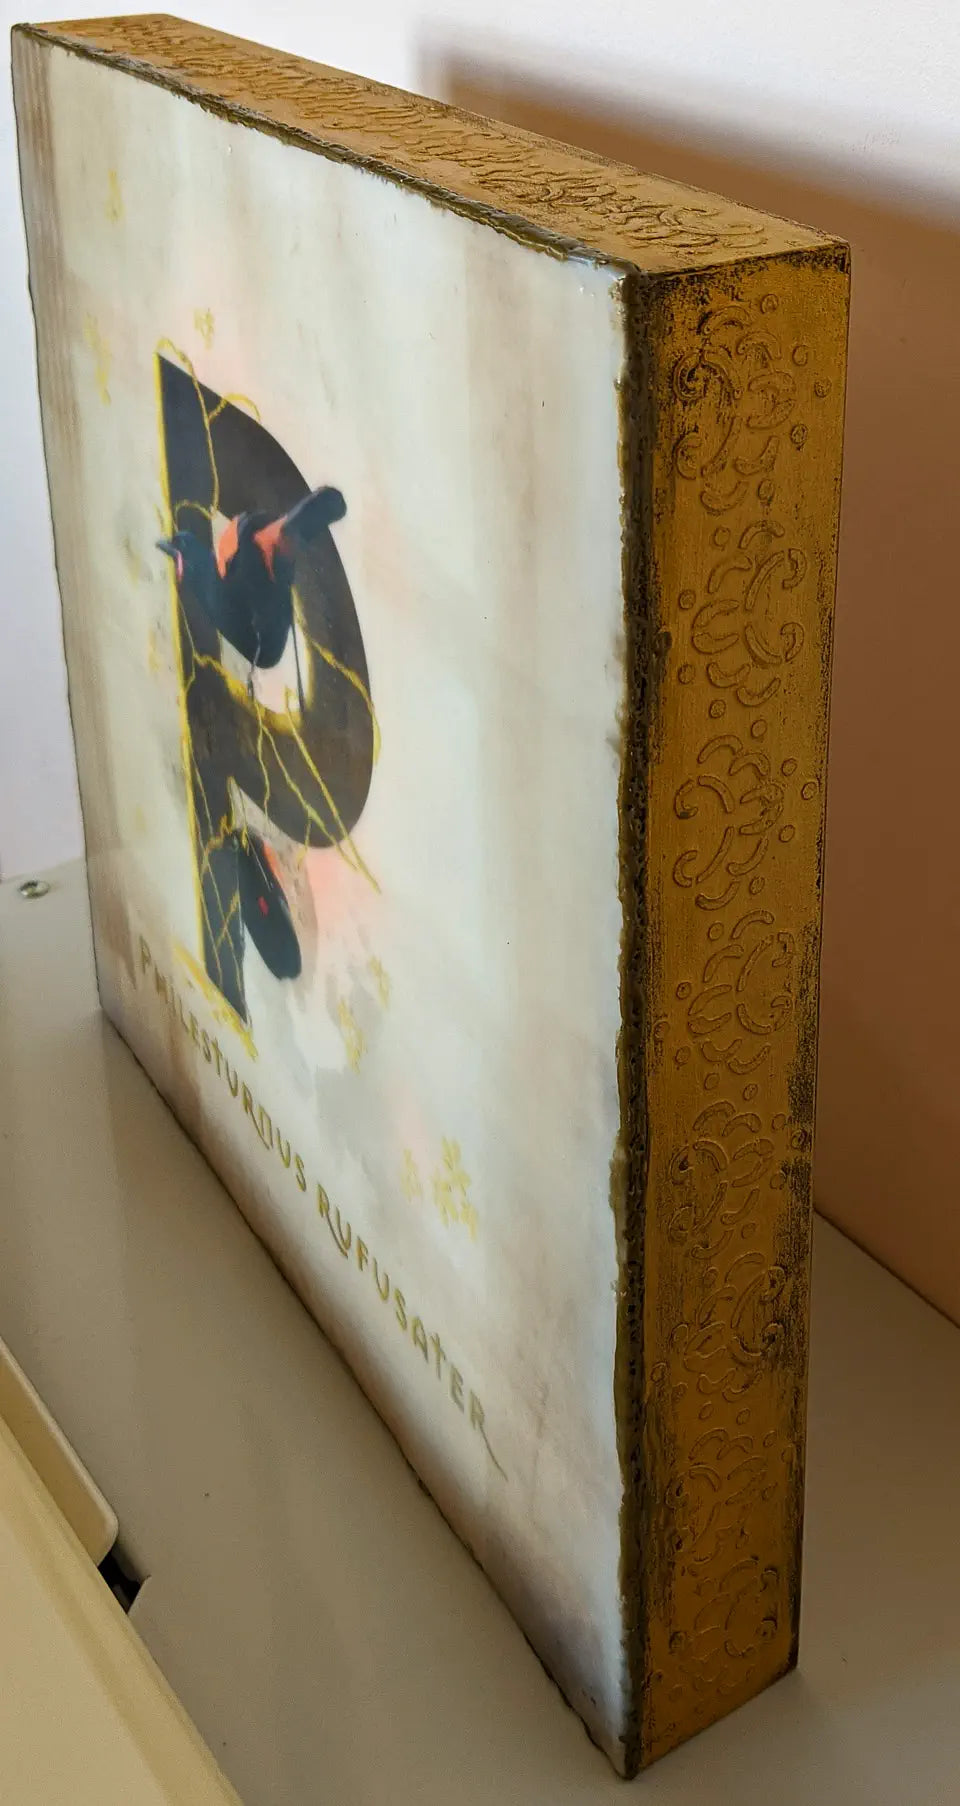 Angled view of the artwork showing the deep sides wtih embossing and textured gold finish